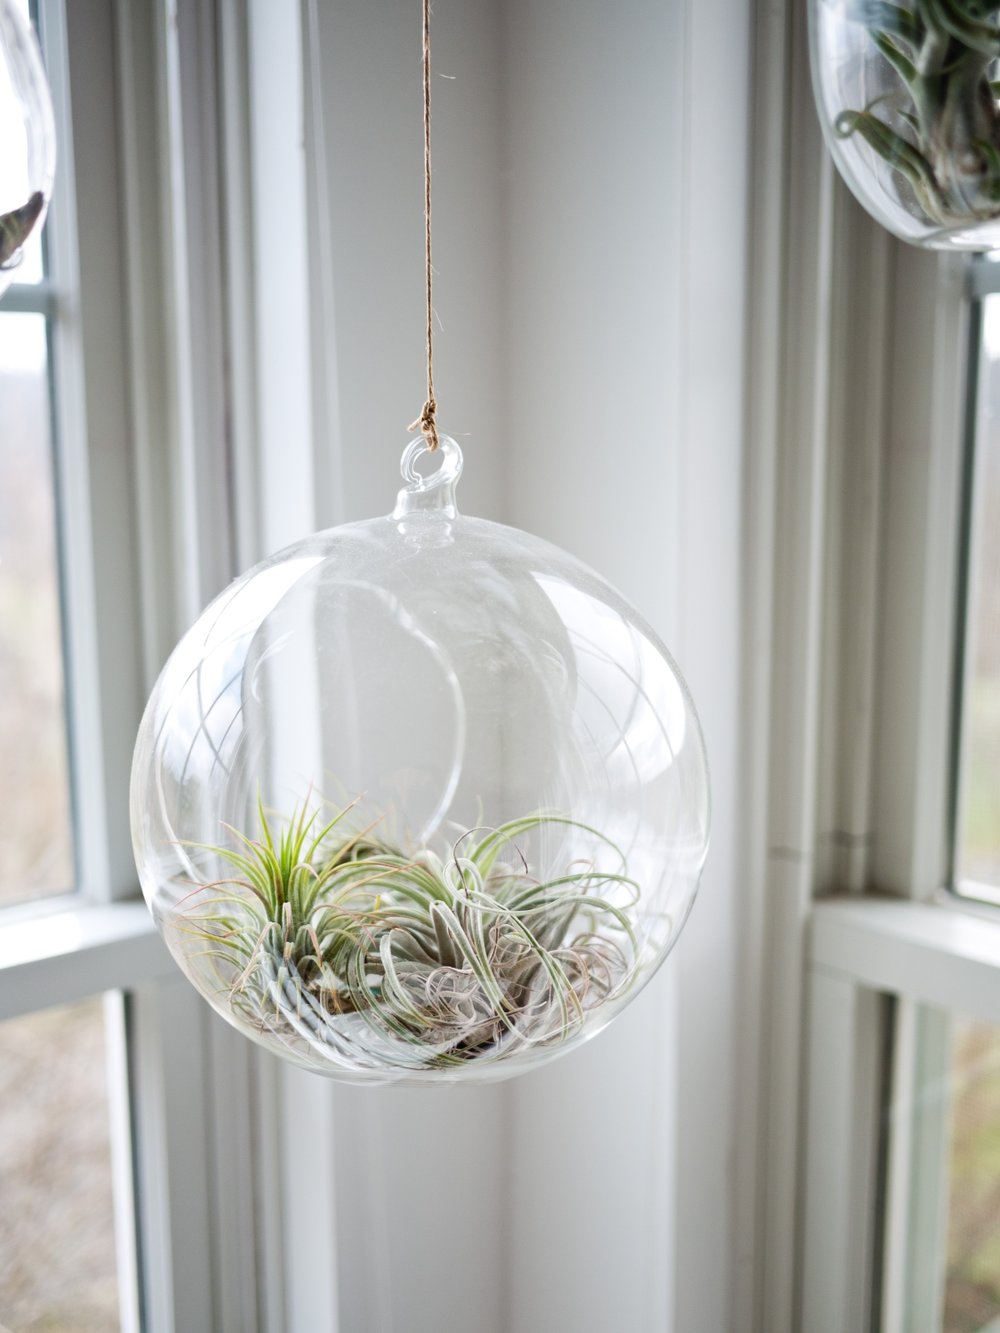  7 Indoor Plants that are hard to Kill - Air Plant 